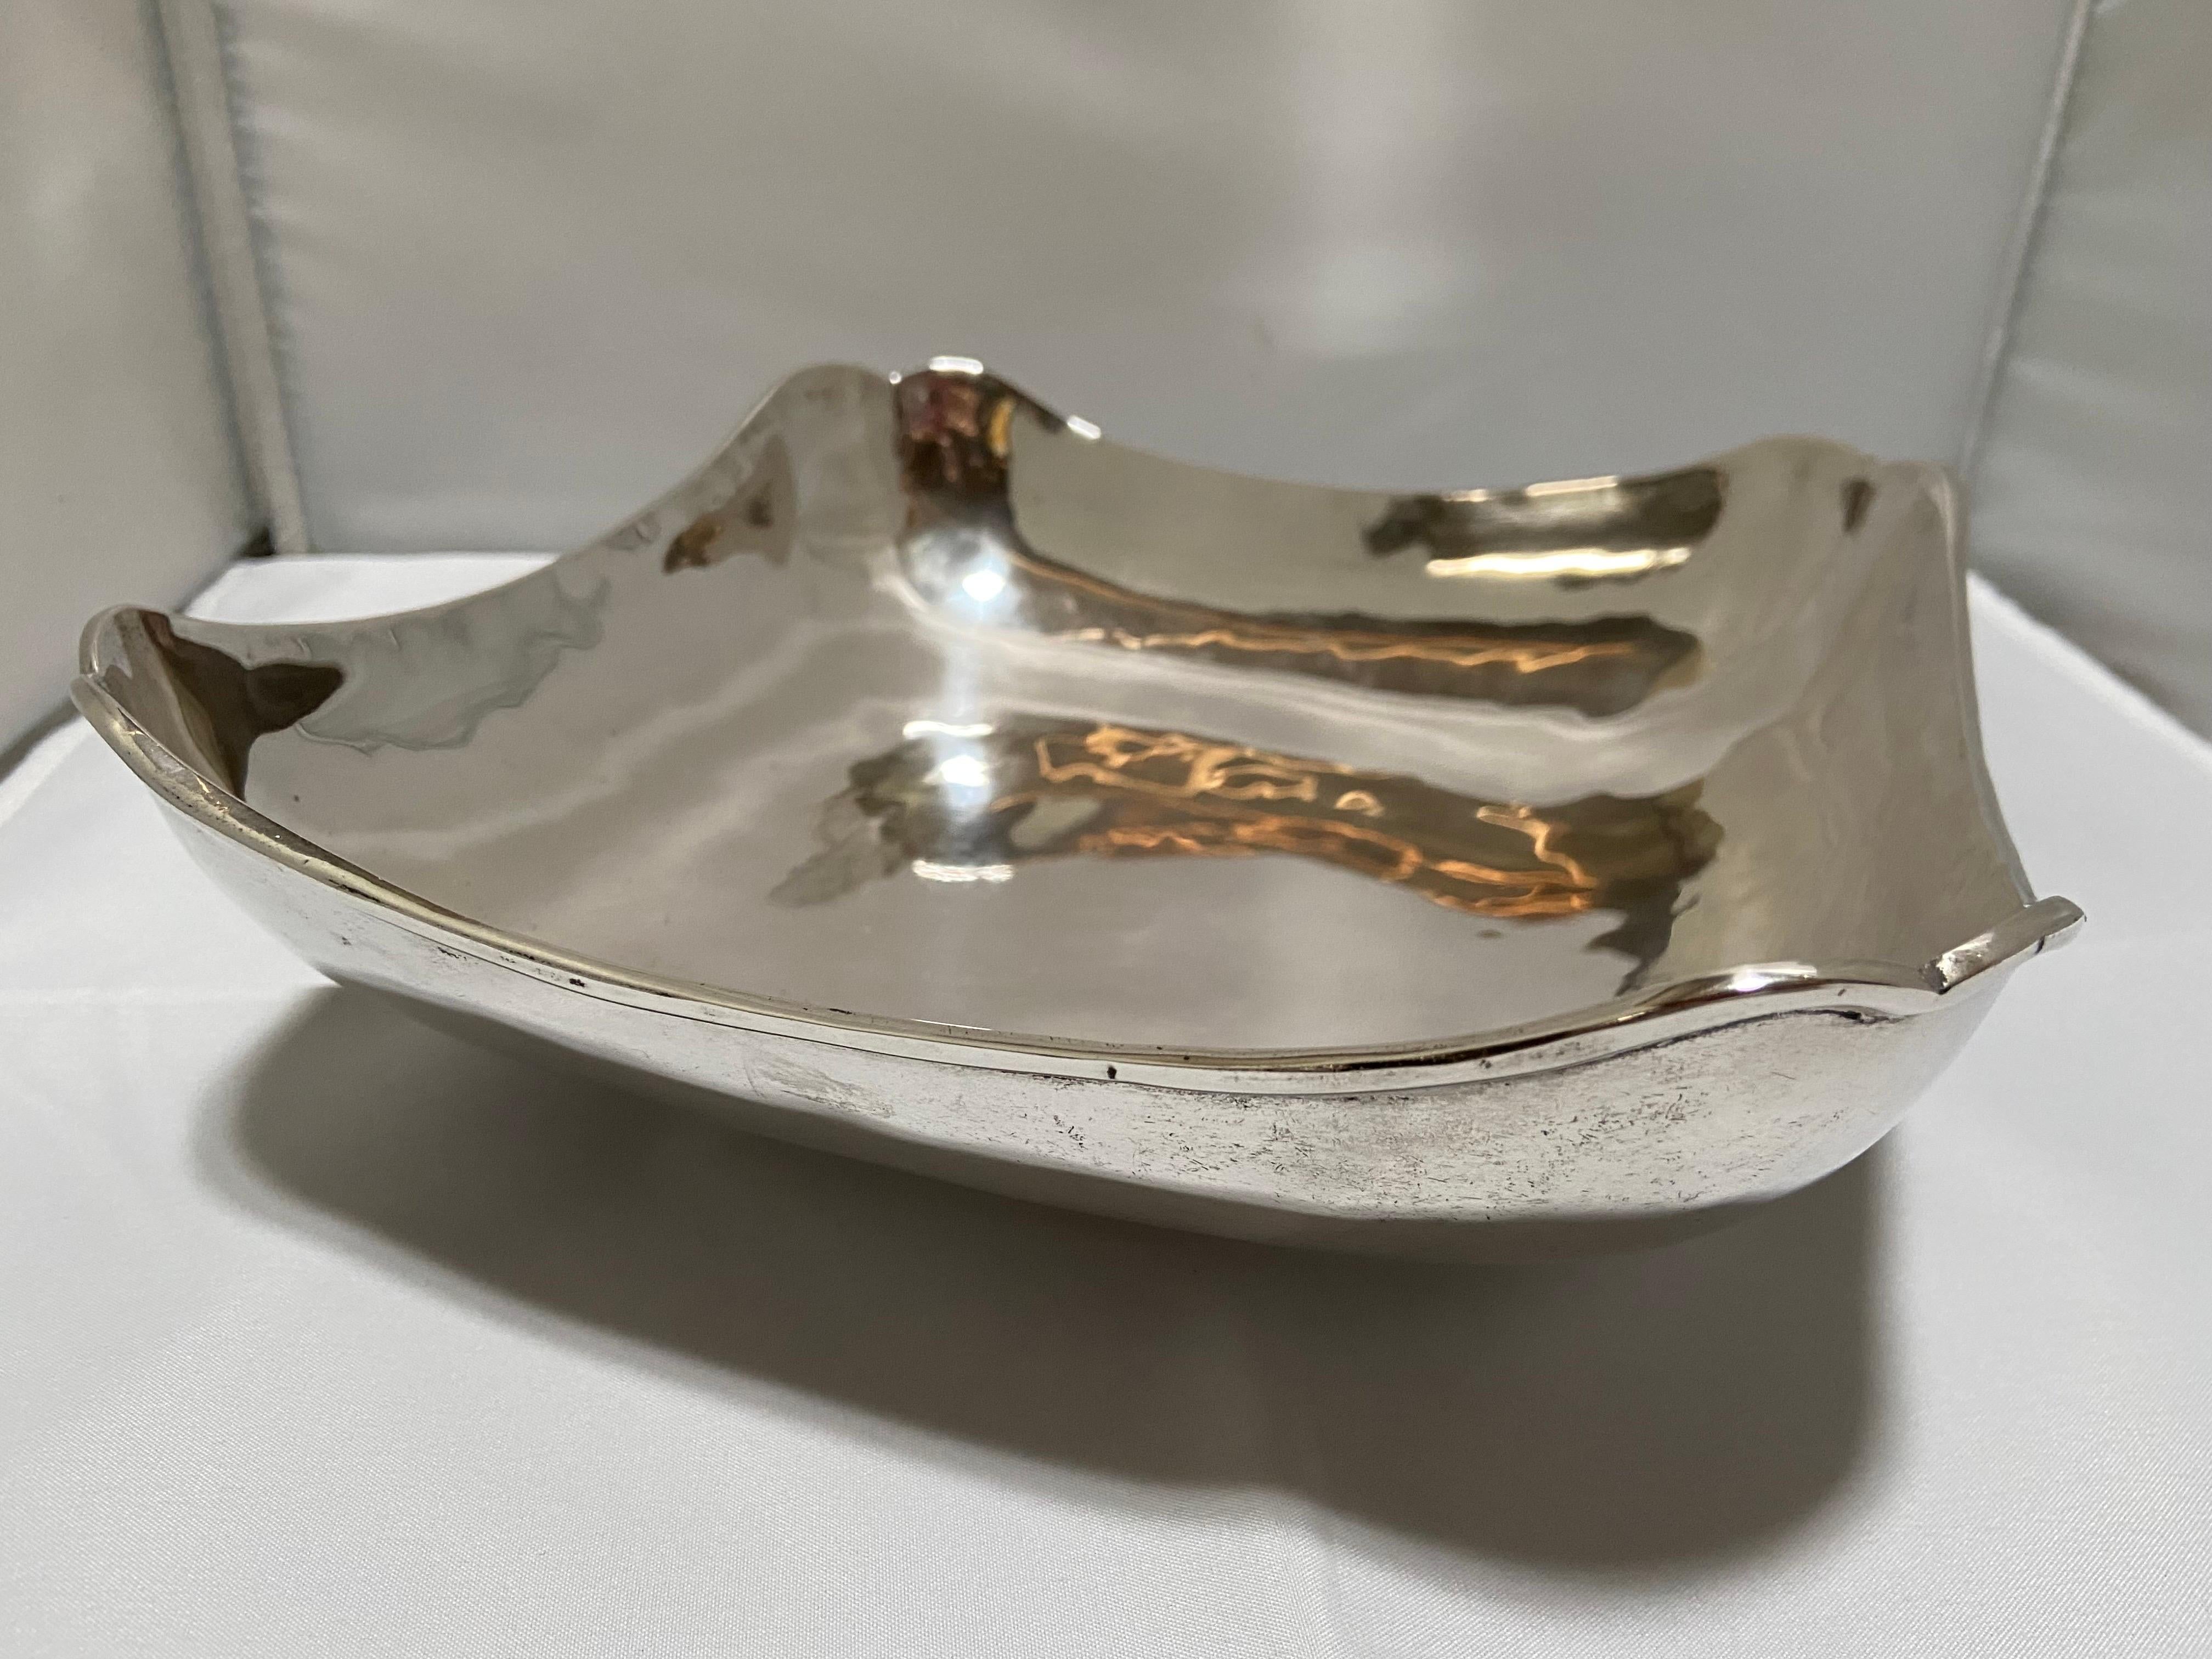 A vintage Mexican sterling silver bowl by the maker C. Zurita. With a nod to the eponymous design firm, Georg Jensen, this piece exhibits a bold, Modernist style with a wide, low profile, scalloped corners and a banded foot. Marked on the bottom.